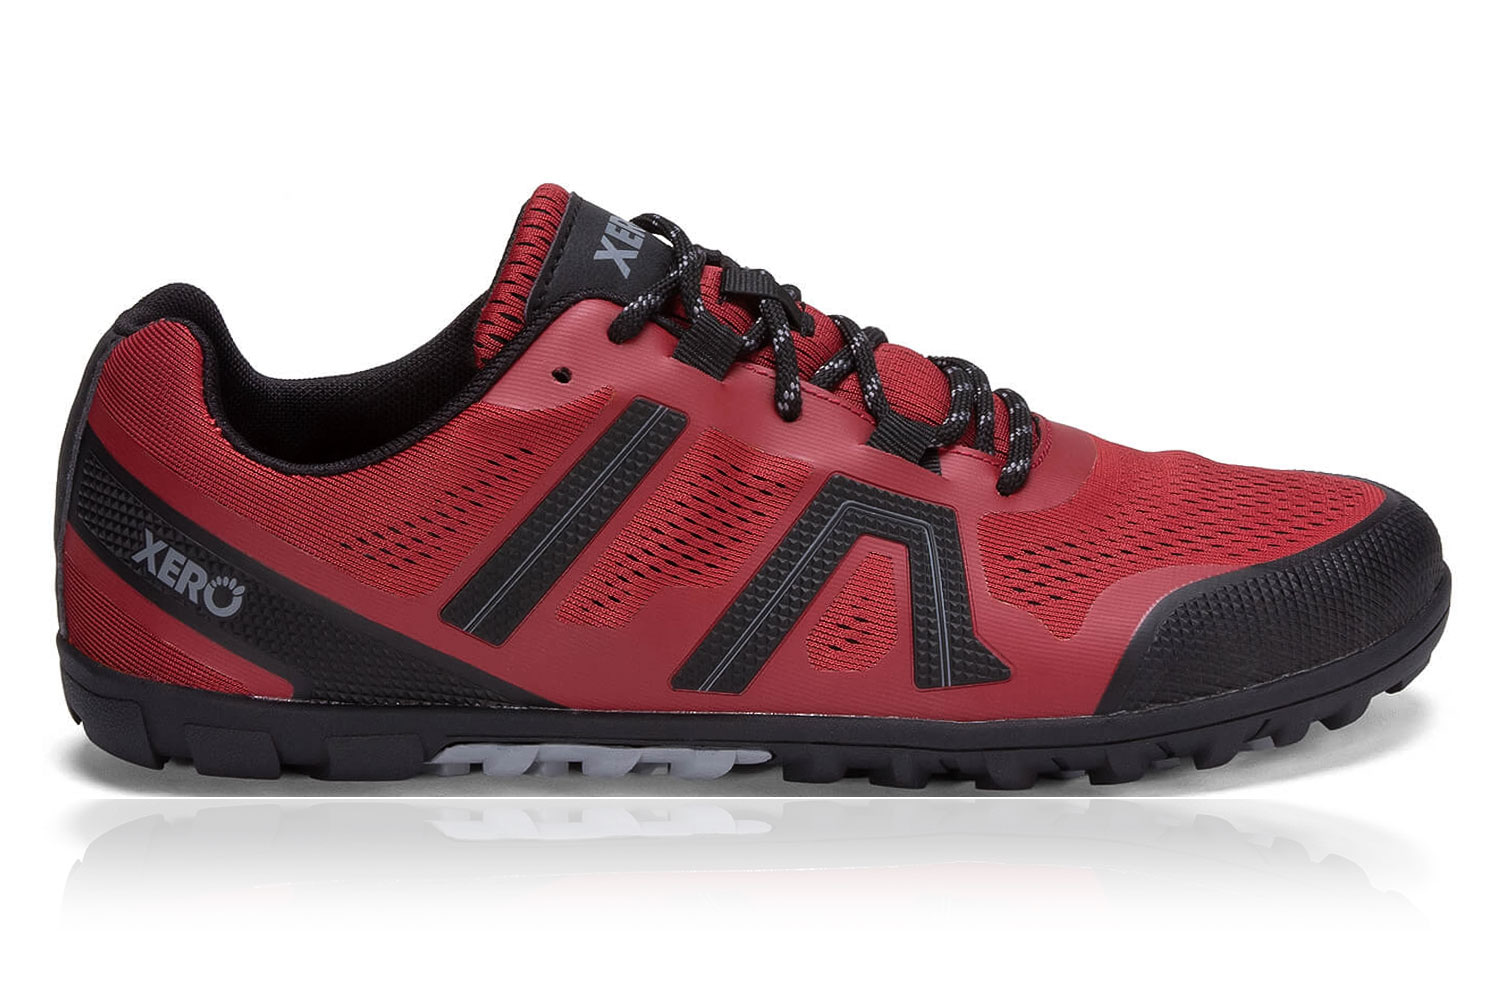 Xero Shoes Launches New Barefoot Shoes for Running, Hiking and Casual Wear  - Xero Shoes